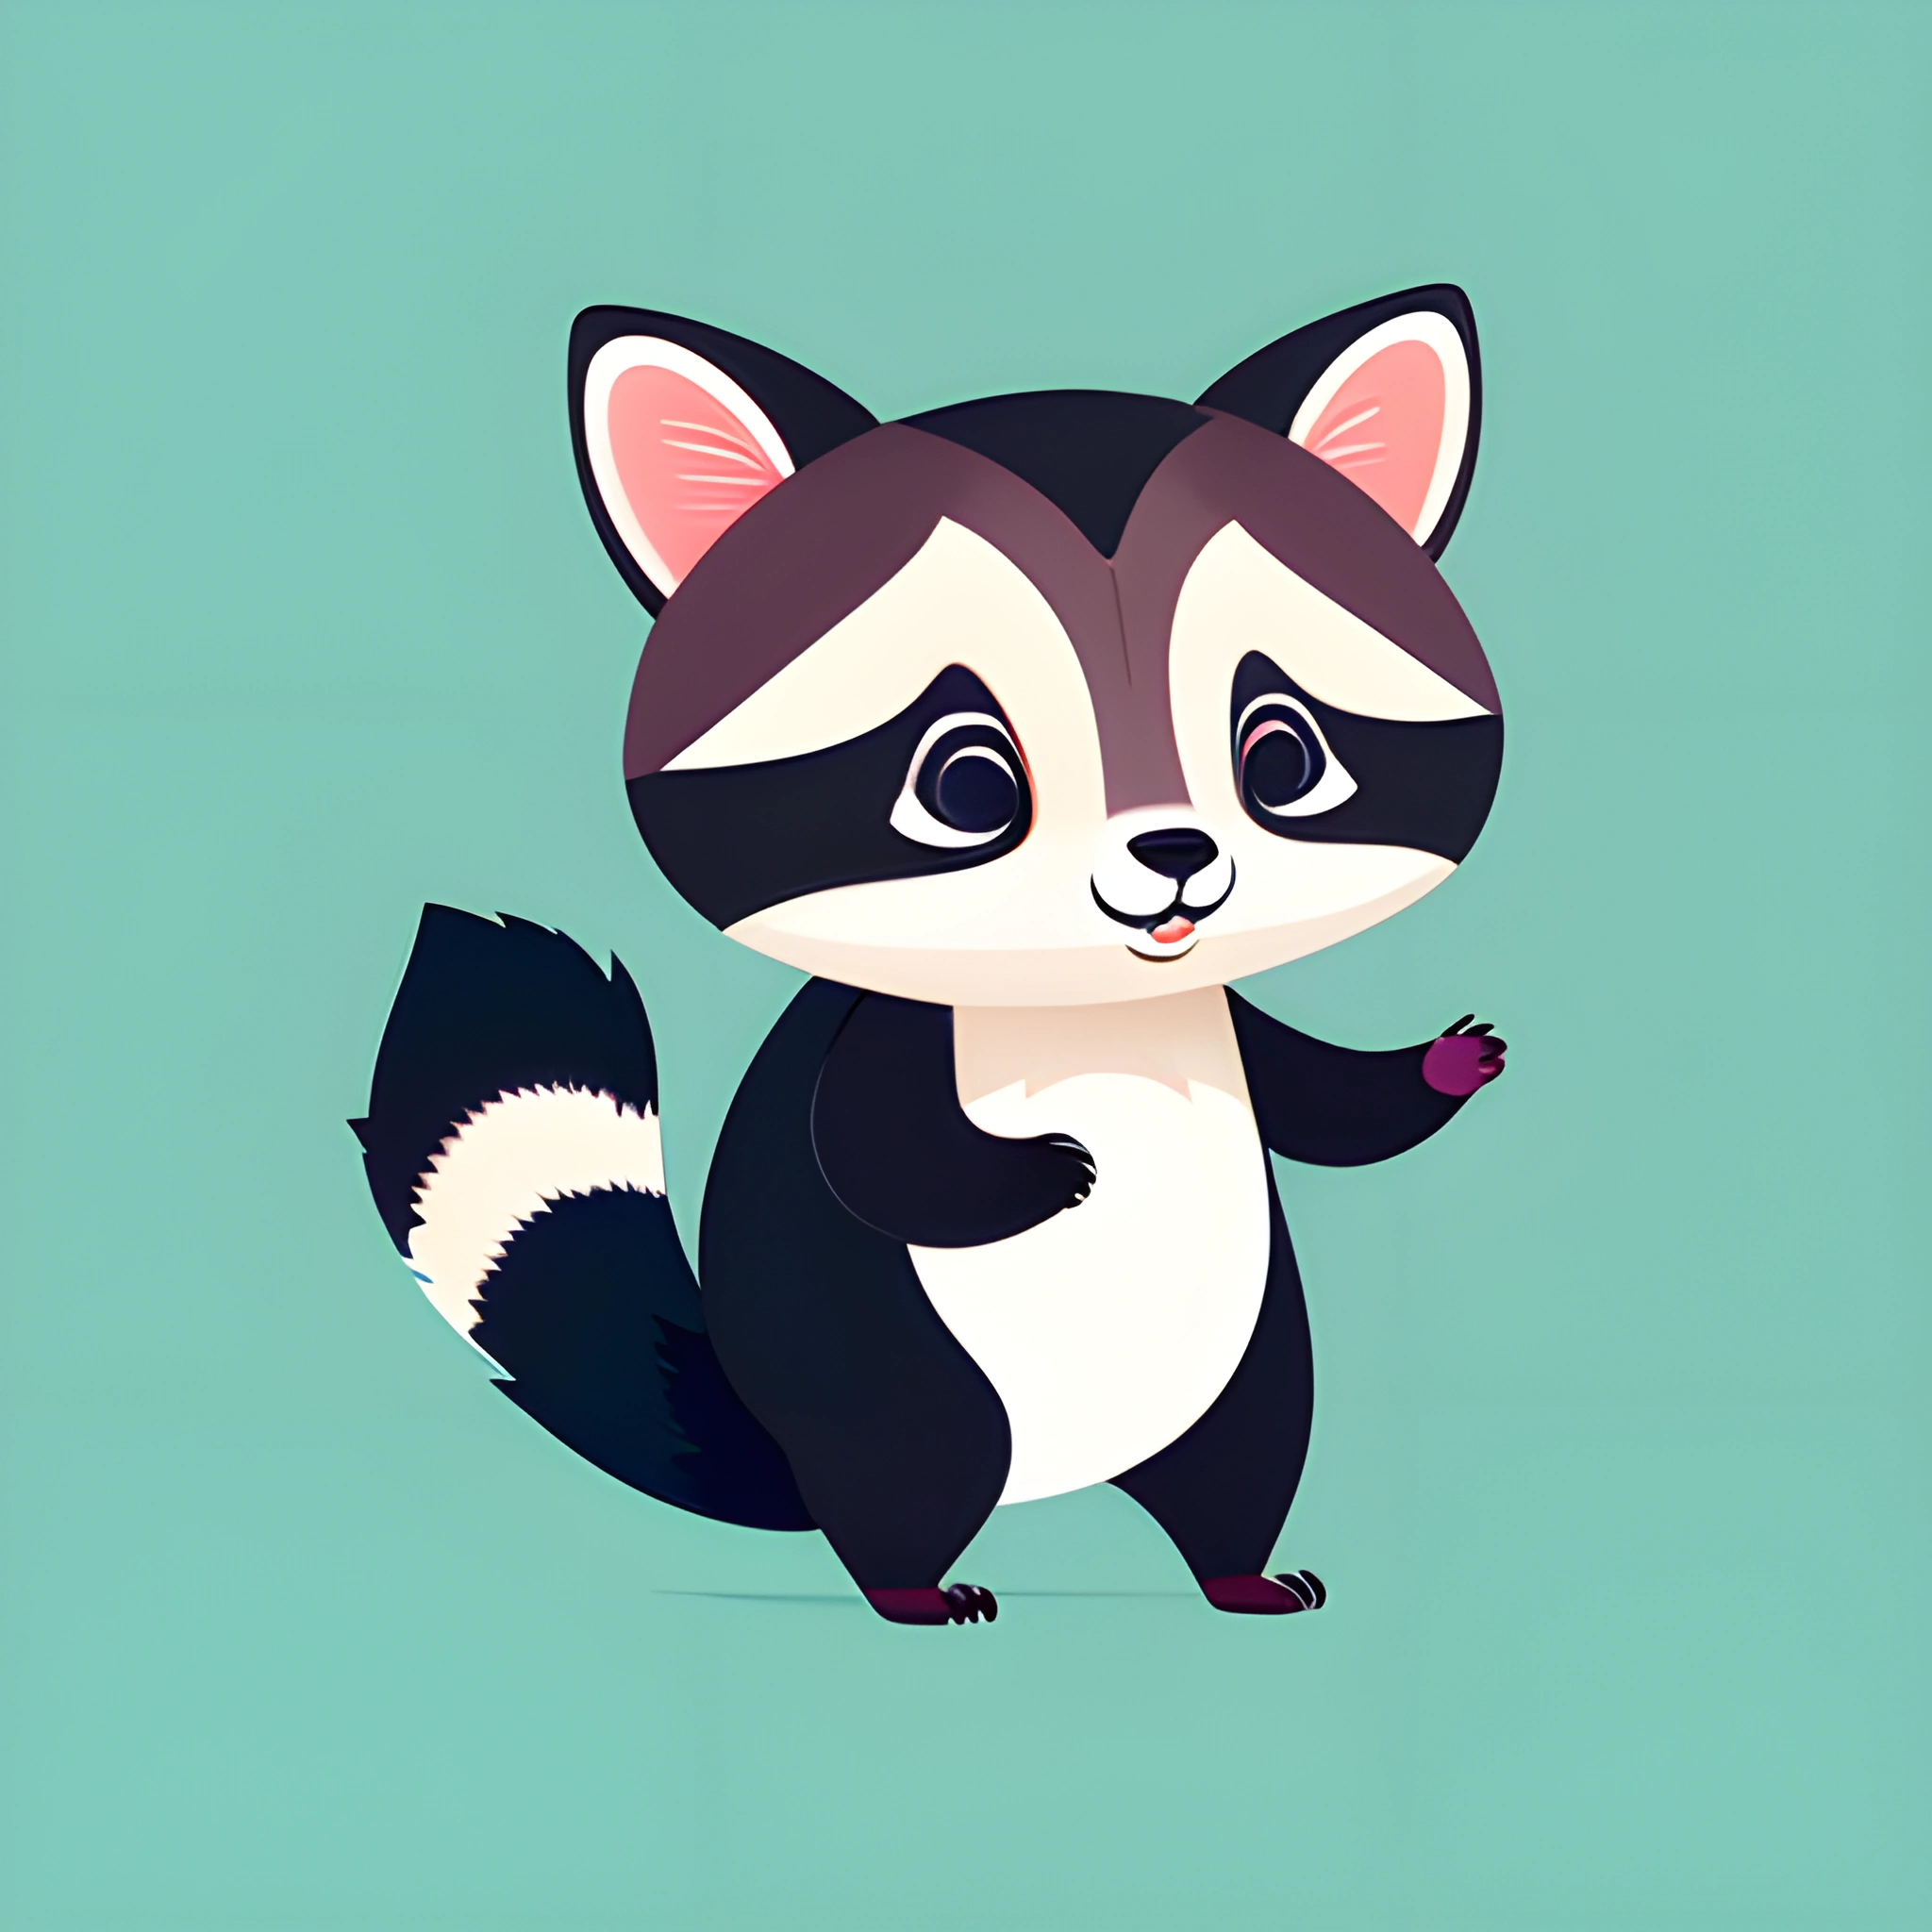 cartoon raccoon with a black and white face and a black tail